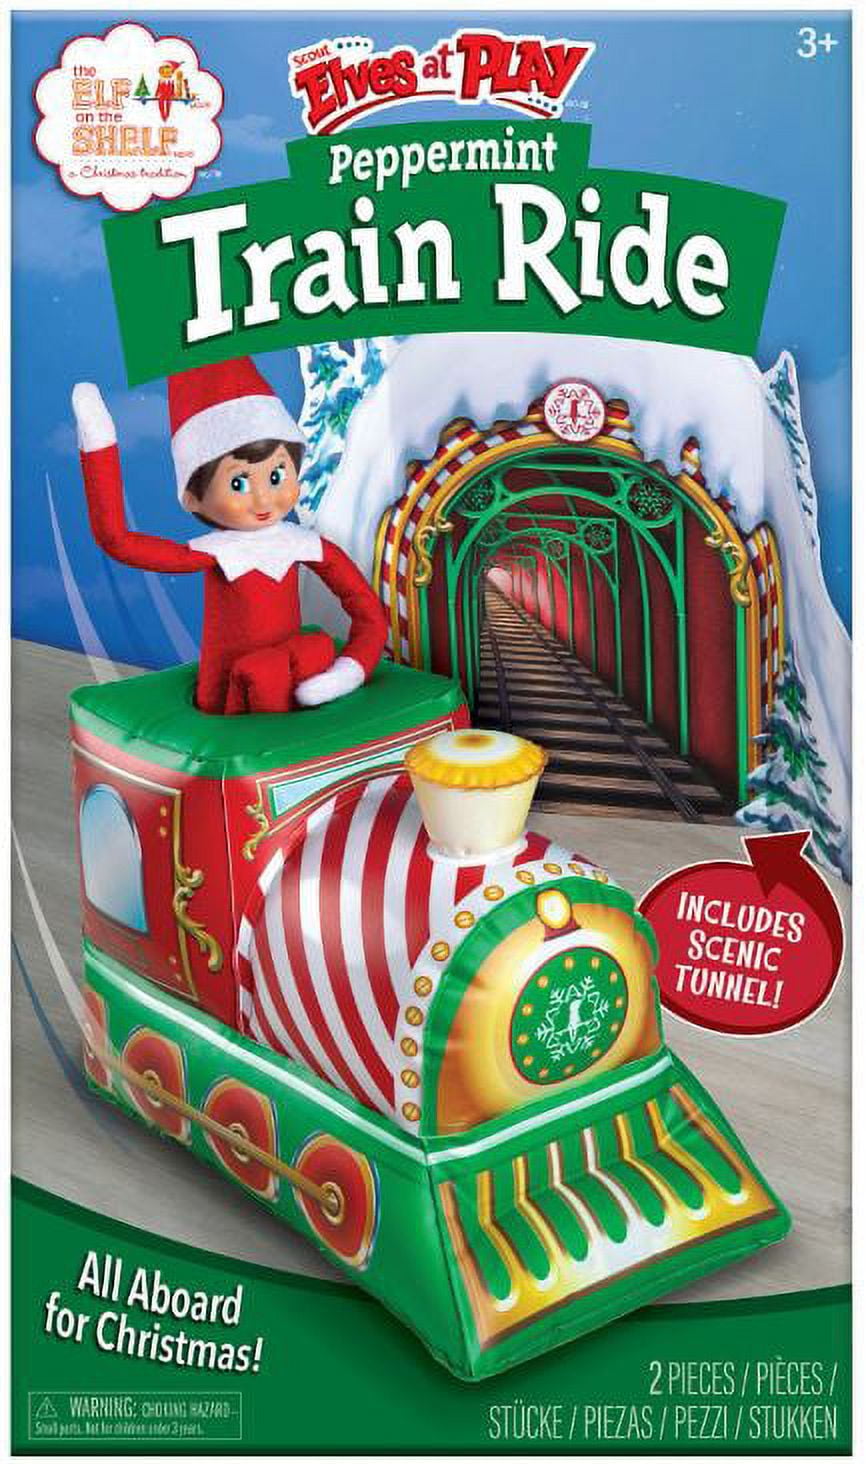 Elf On The Shelf Scout Elves At Play Peppermint Train Ride - Walmart.com